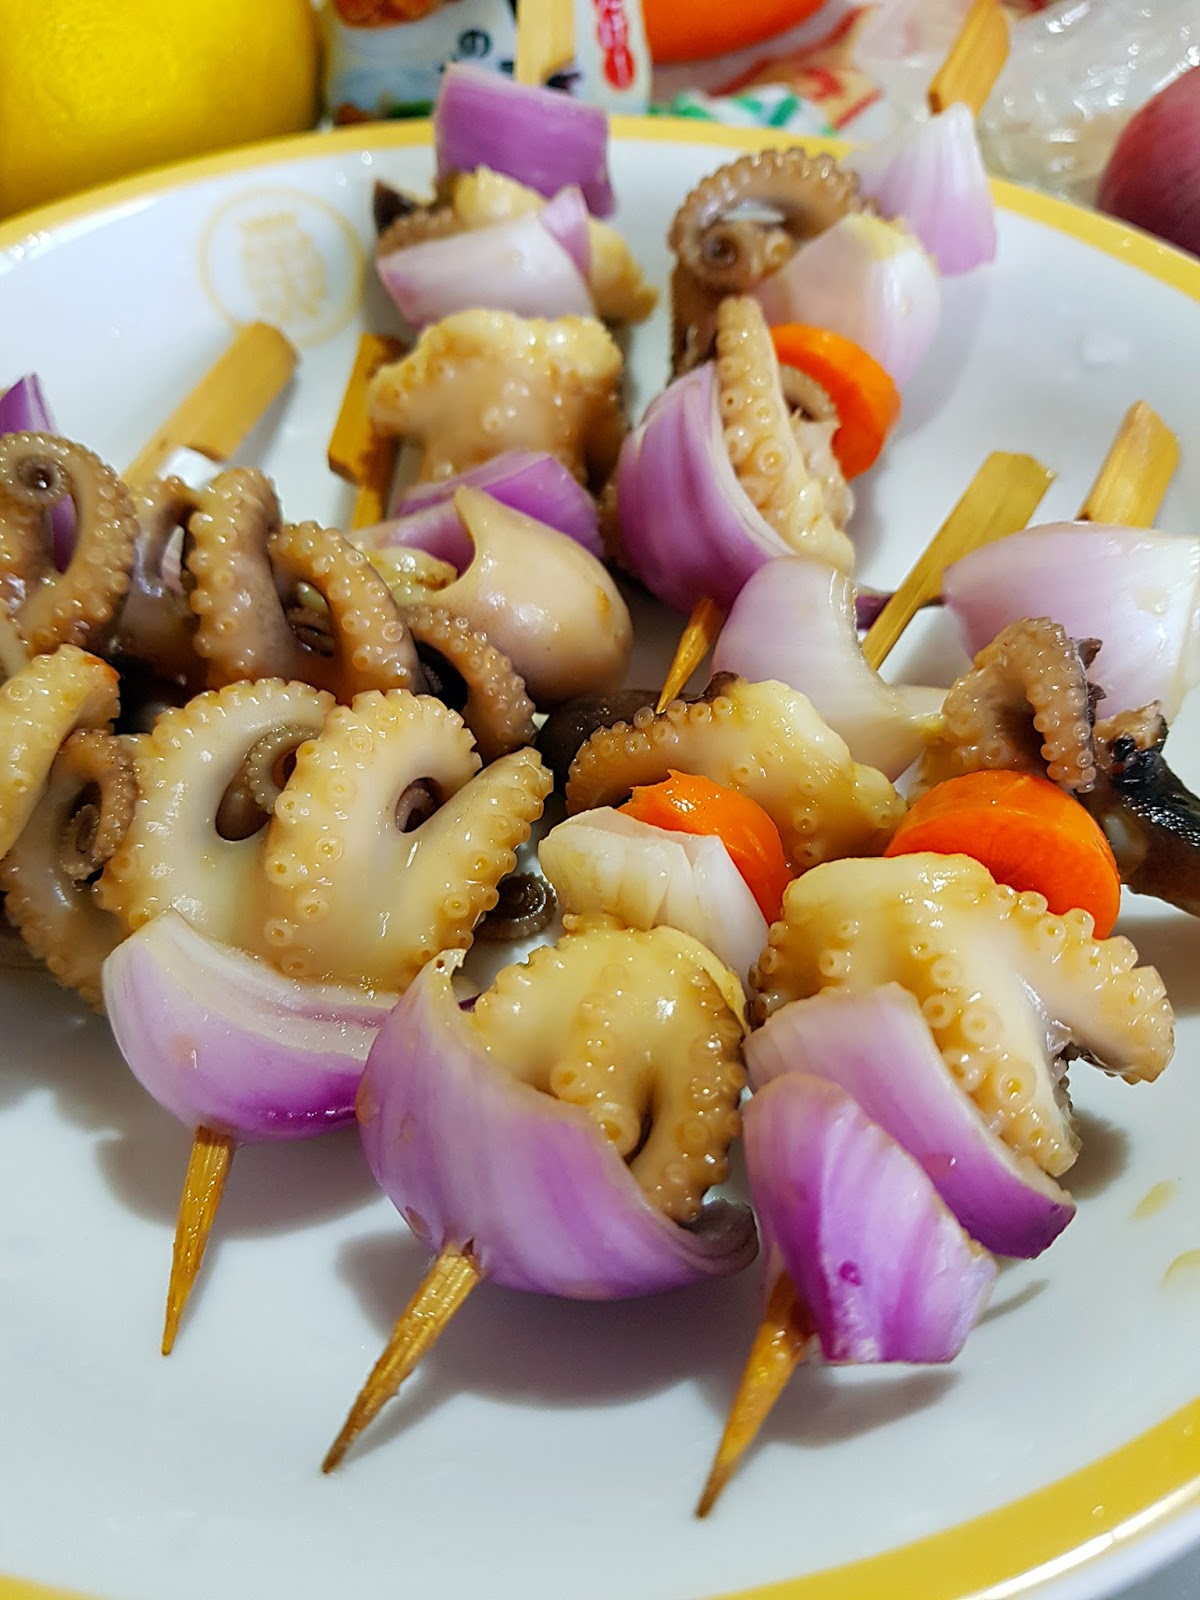 Jeannie62 Kitchen: AIR-FRY CHARRED BABY OCTOPUS